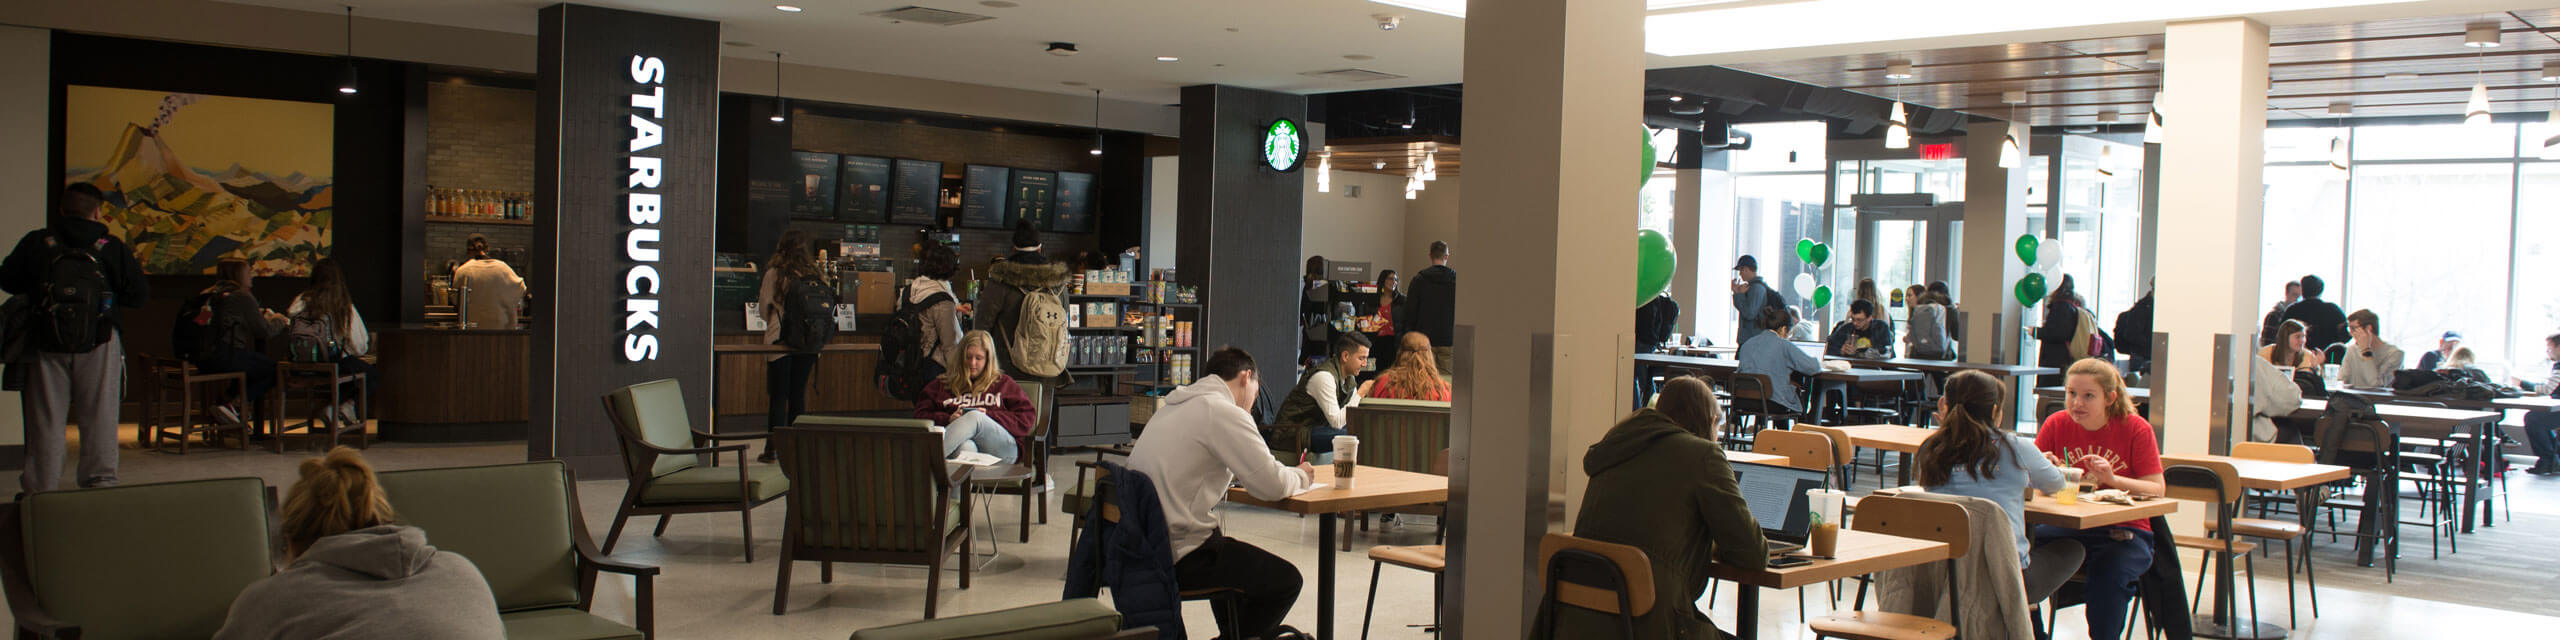 Students dine at the Starbucks in the Bone Student Center.